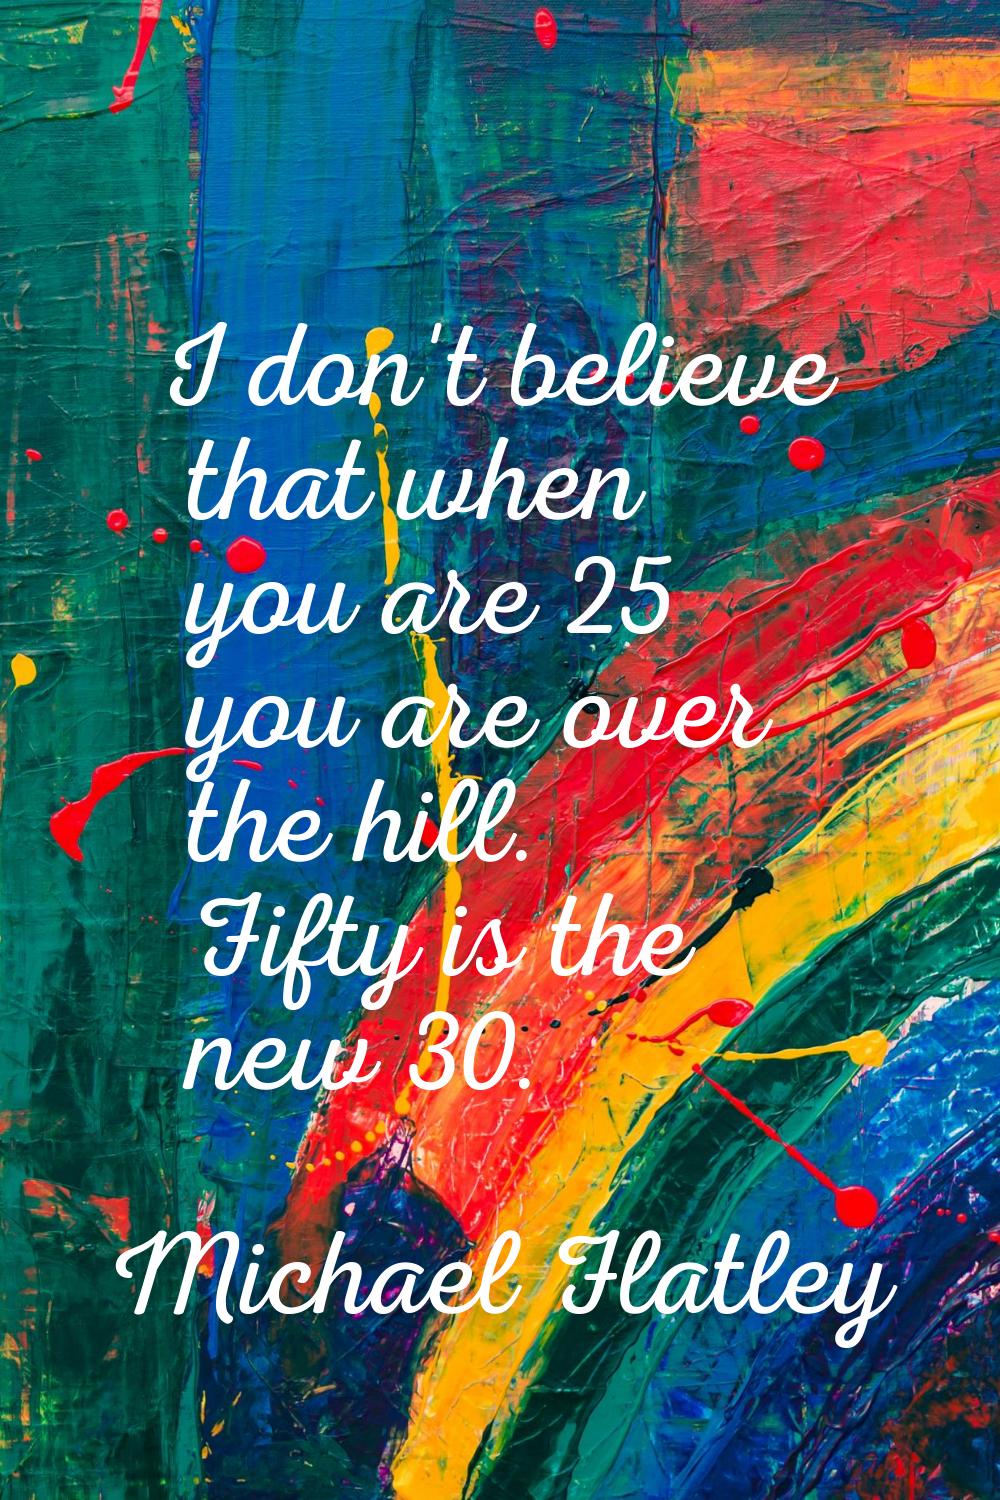 I don't believe that when you are 25 you are over the hill. Fifty is the new 30.